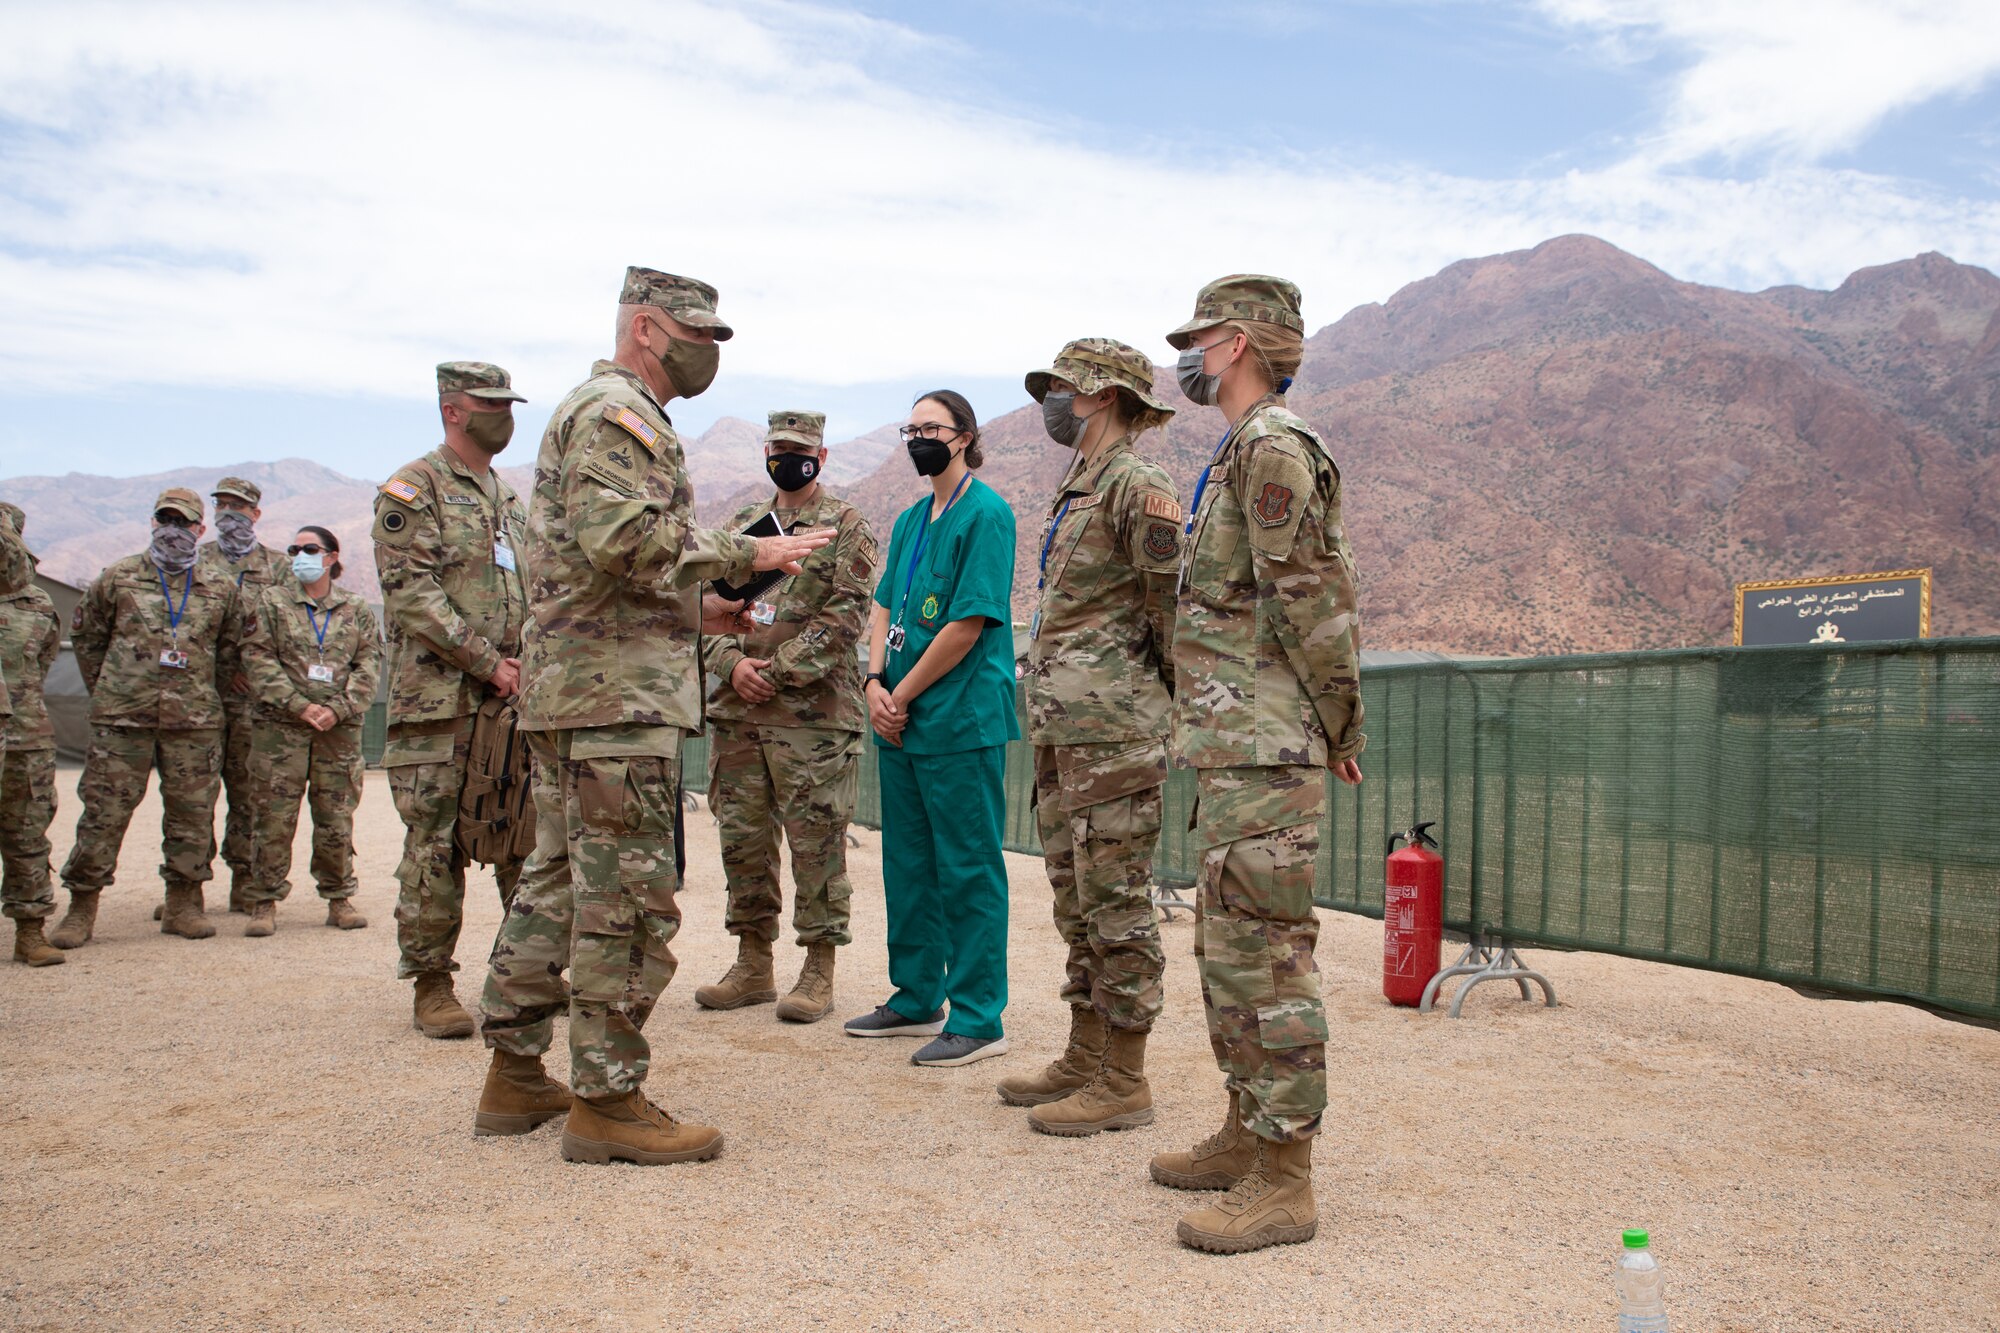 U.S. Army Maj. Gen. Michael Turley, adjutant general Utah National Guard, thanks Airmen working at Military Medical Surgical Field Hospital in Tafraoute, Morocco, June 16, 2021, as part of U.S. Africa Command’s African Lion 2021 exercise.